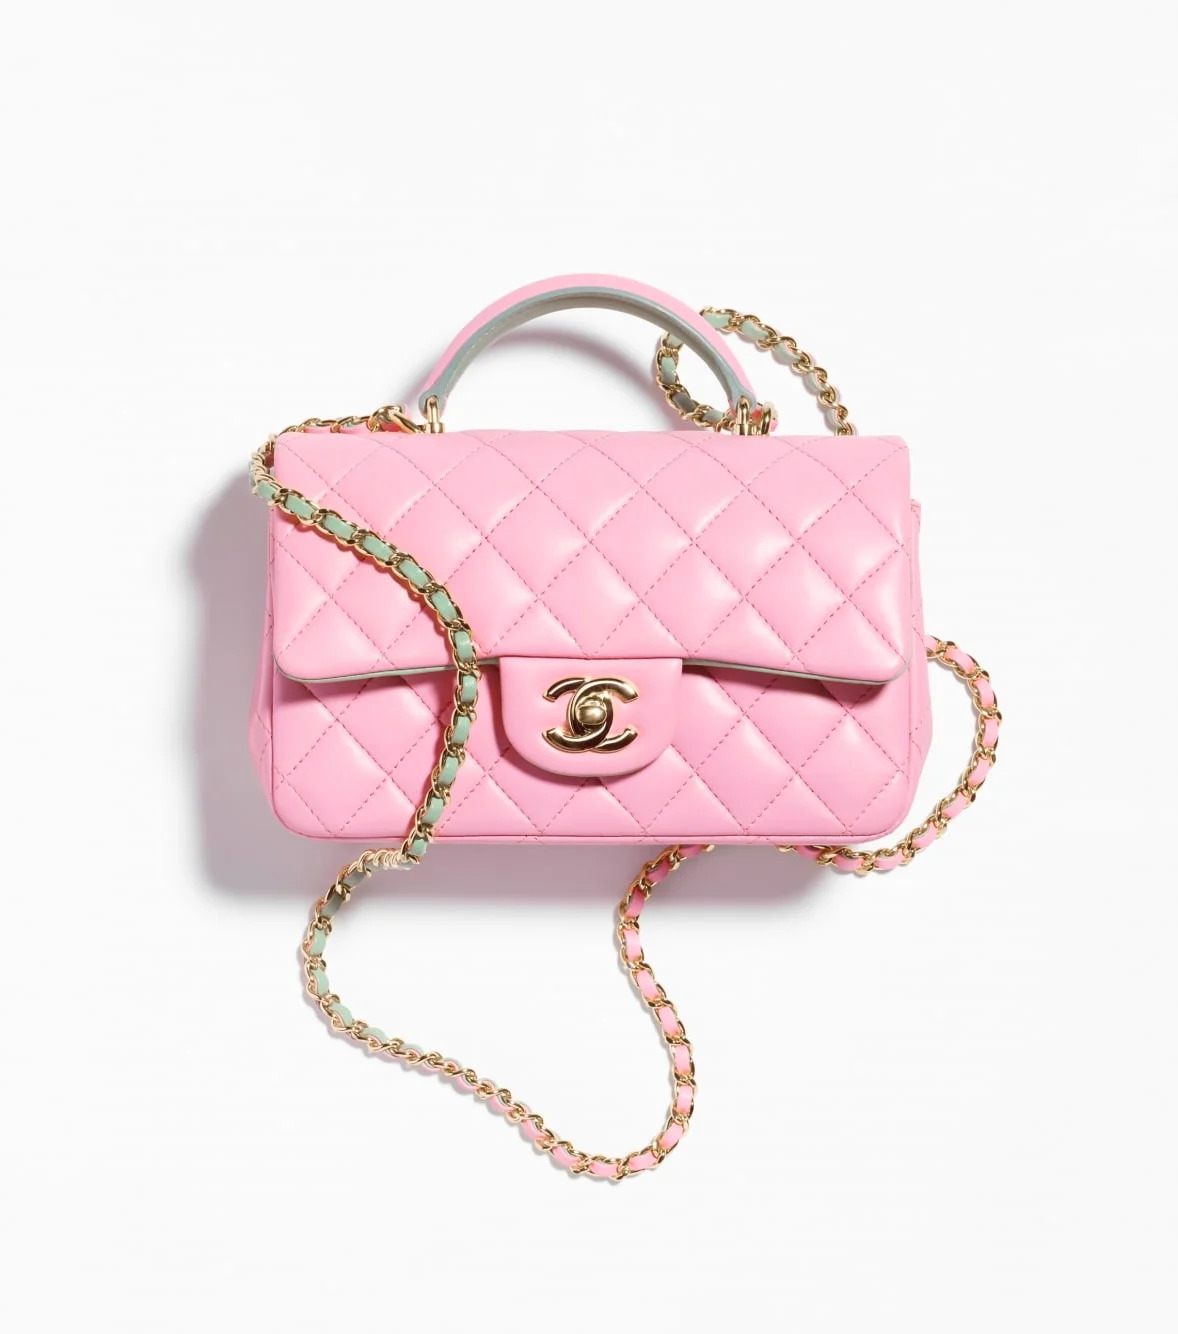 Chanel's Spring/Summer 2023 pre-collection handbags are here!